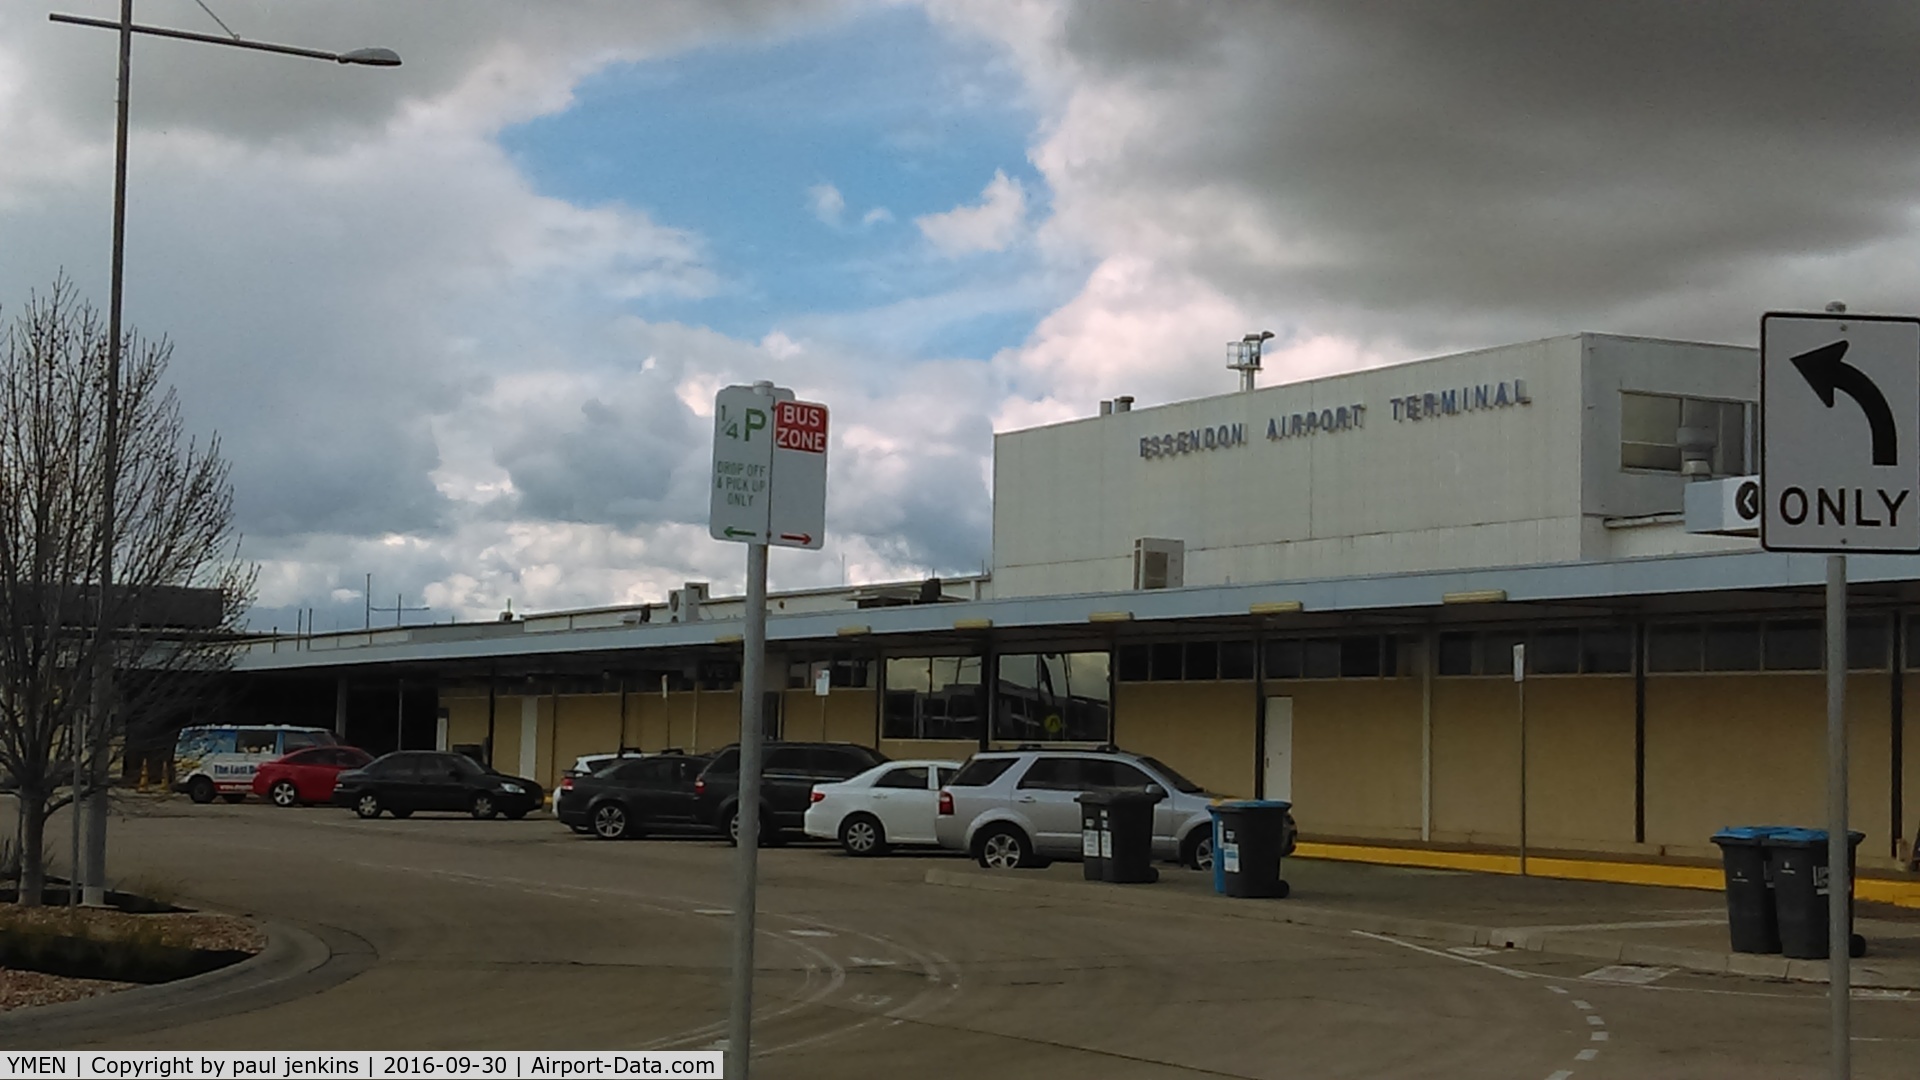 Essendon Airport, Essendon North, Victoria Australia (YMEN) - The main terminal building, built in the early 1960s was used as the key airport for Melbourne until 1970 